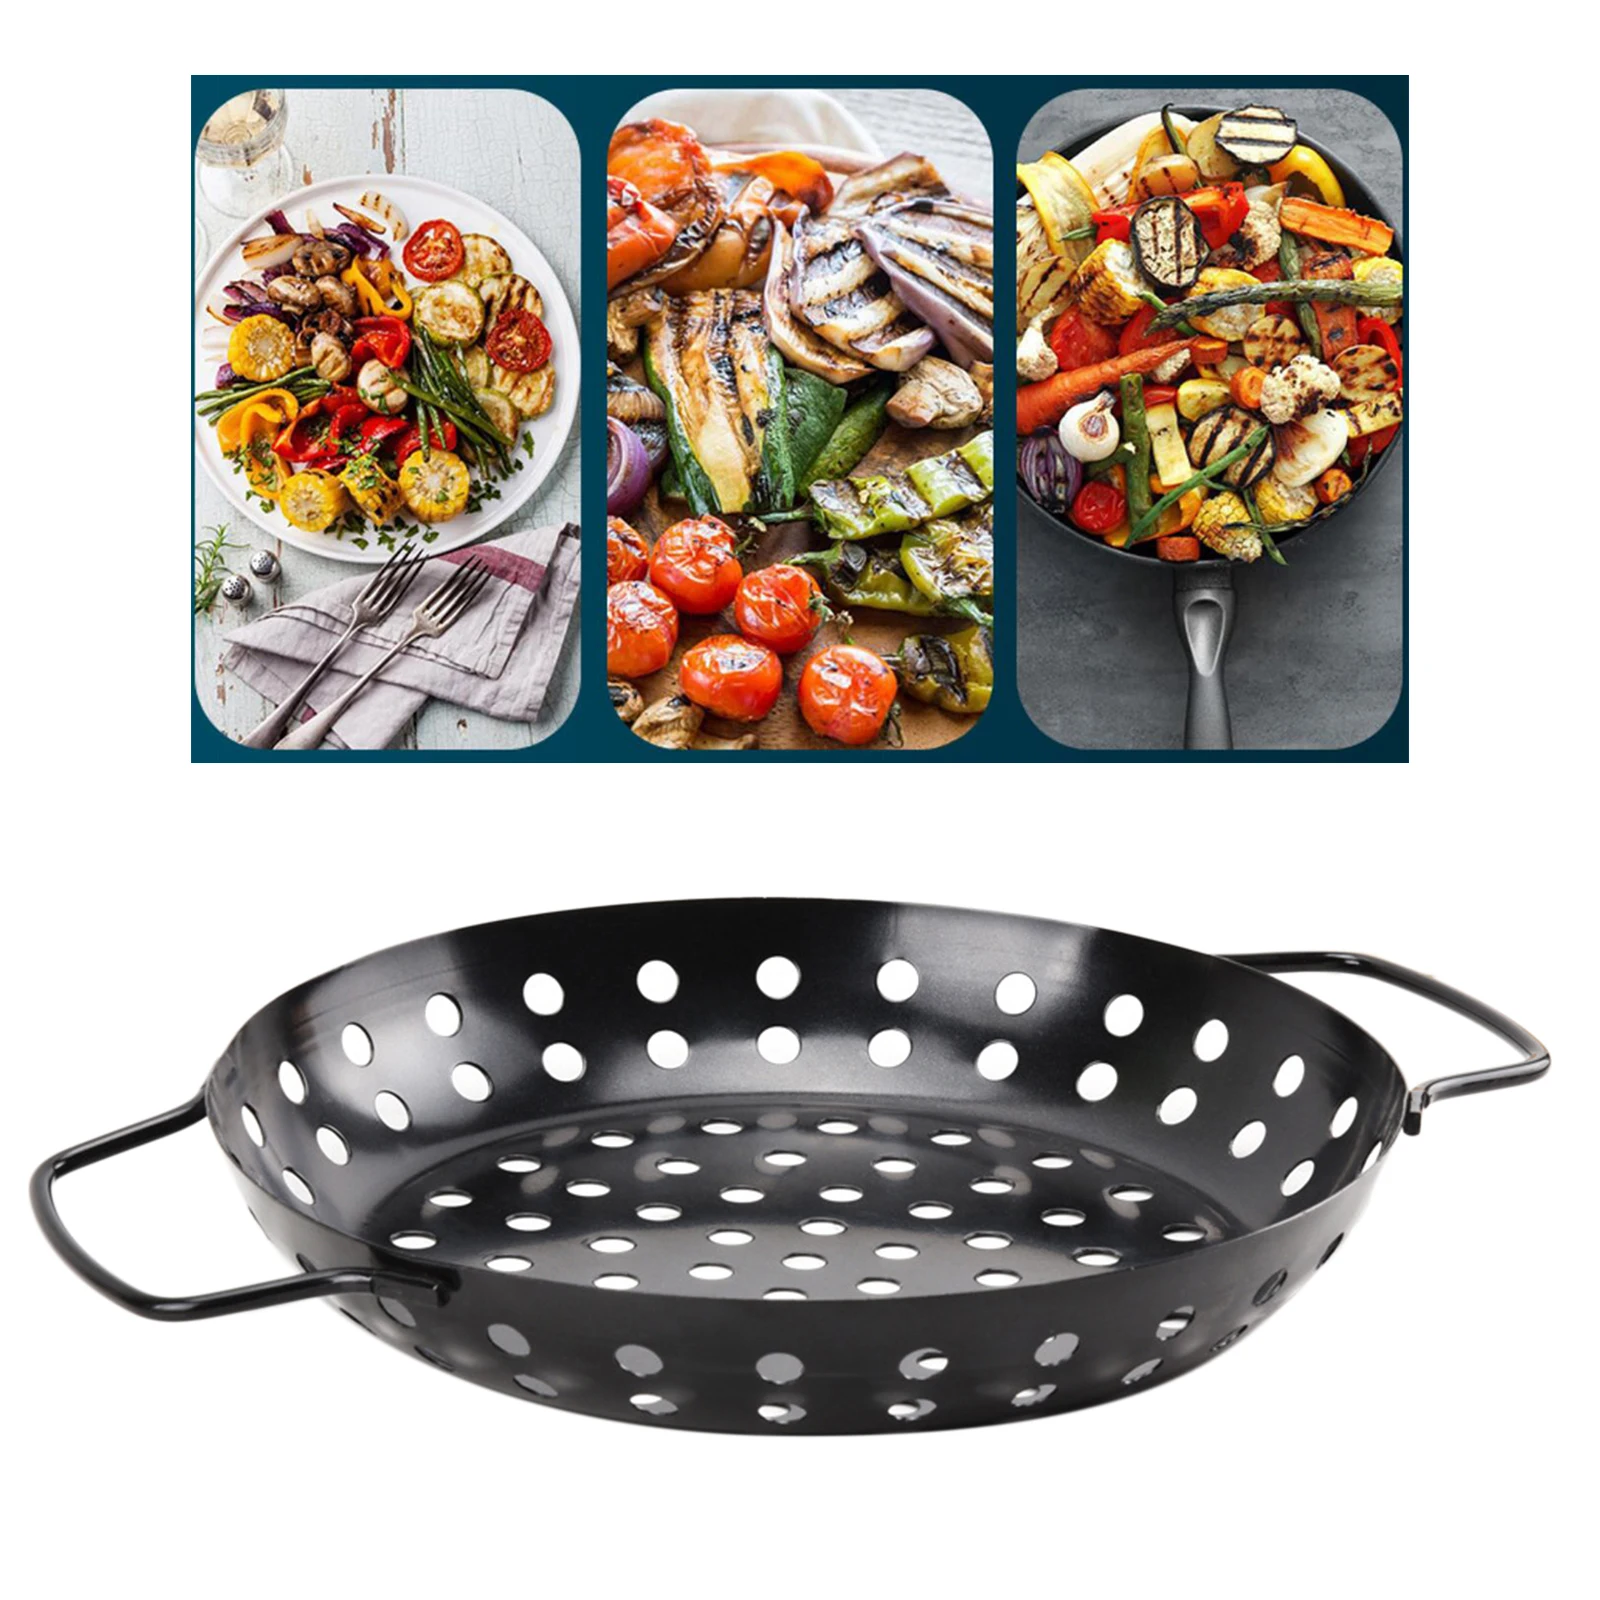 Carbon Steel BBQ Grill Pan Barbecue Grilling Tray Baking Plate for Pizza, Meat, Vegetables